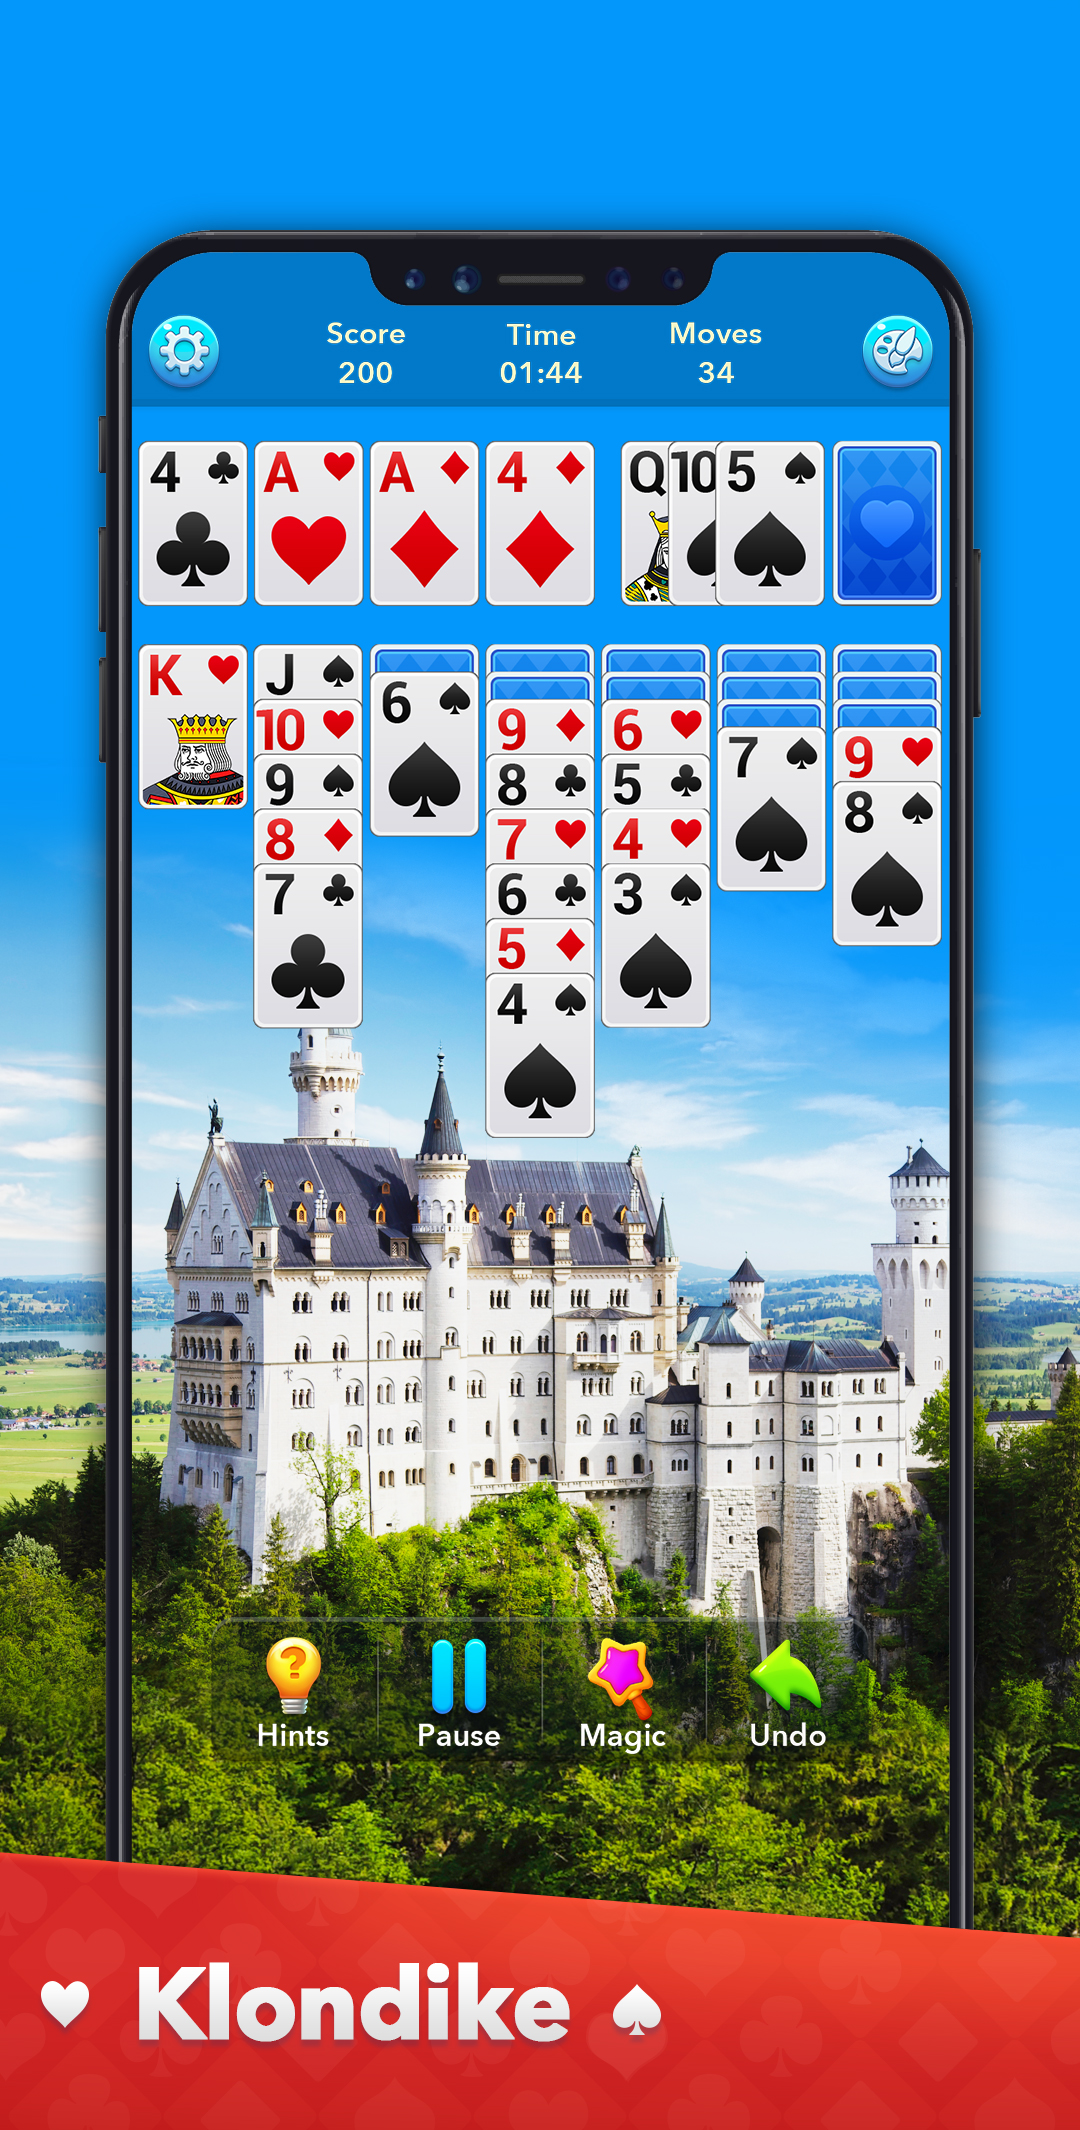 Play Solitaire Collection Online